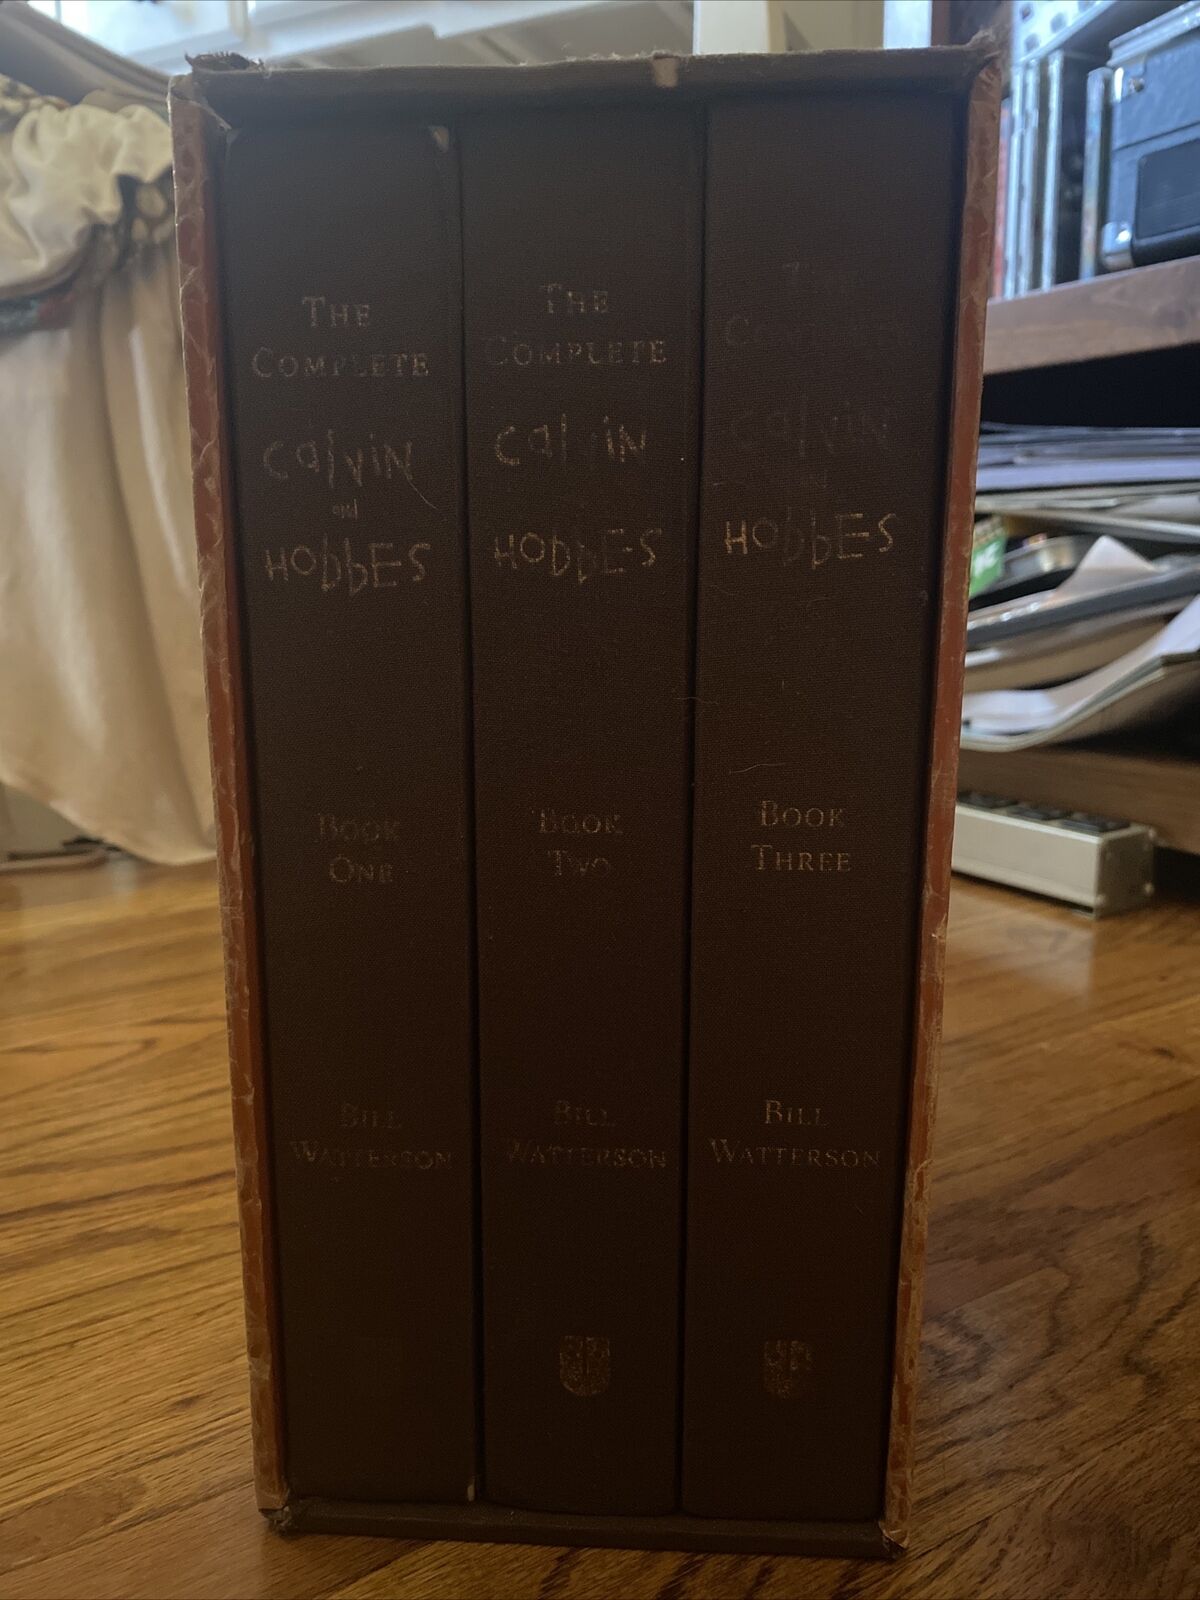 The Complete Calvin and Hobbes Hardcover Box Set. First Edition.